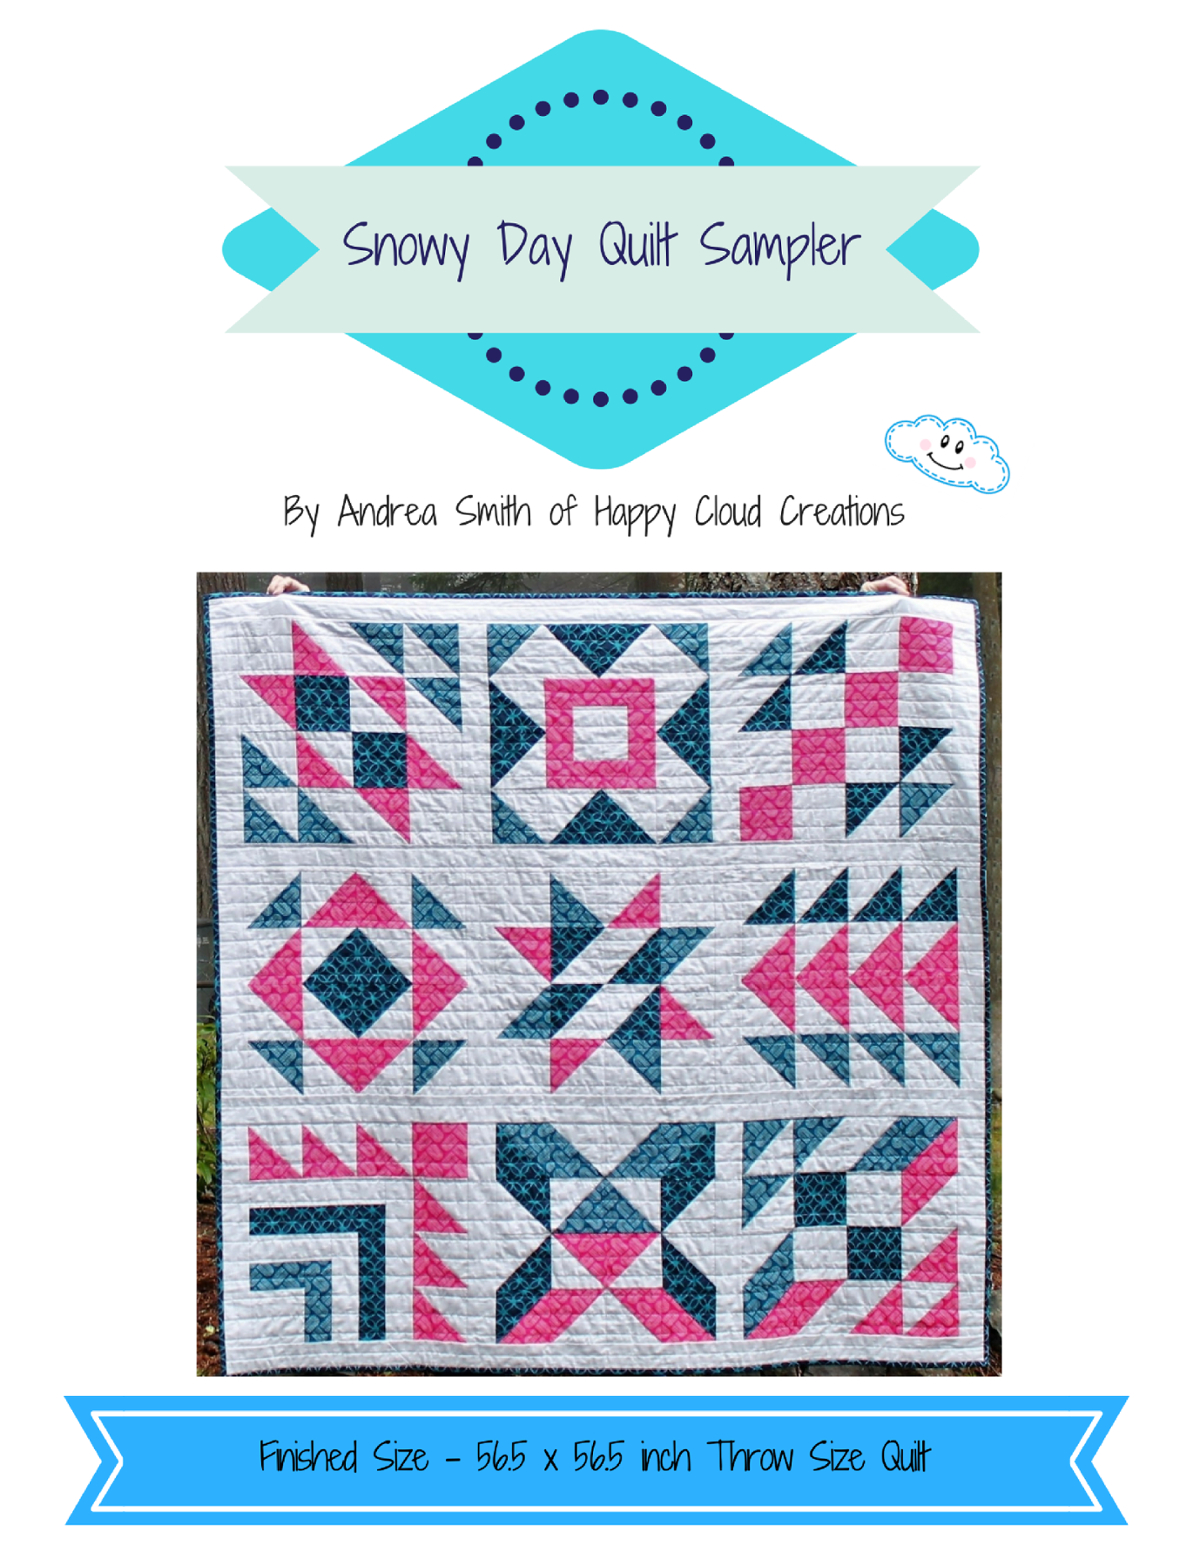 Snowy Day Quilt Sampler Throw Size Happy Cloud Creations 